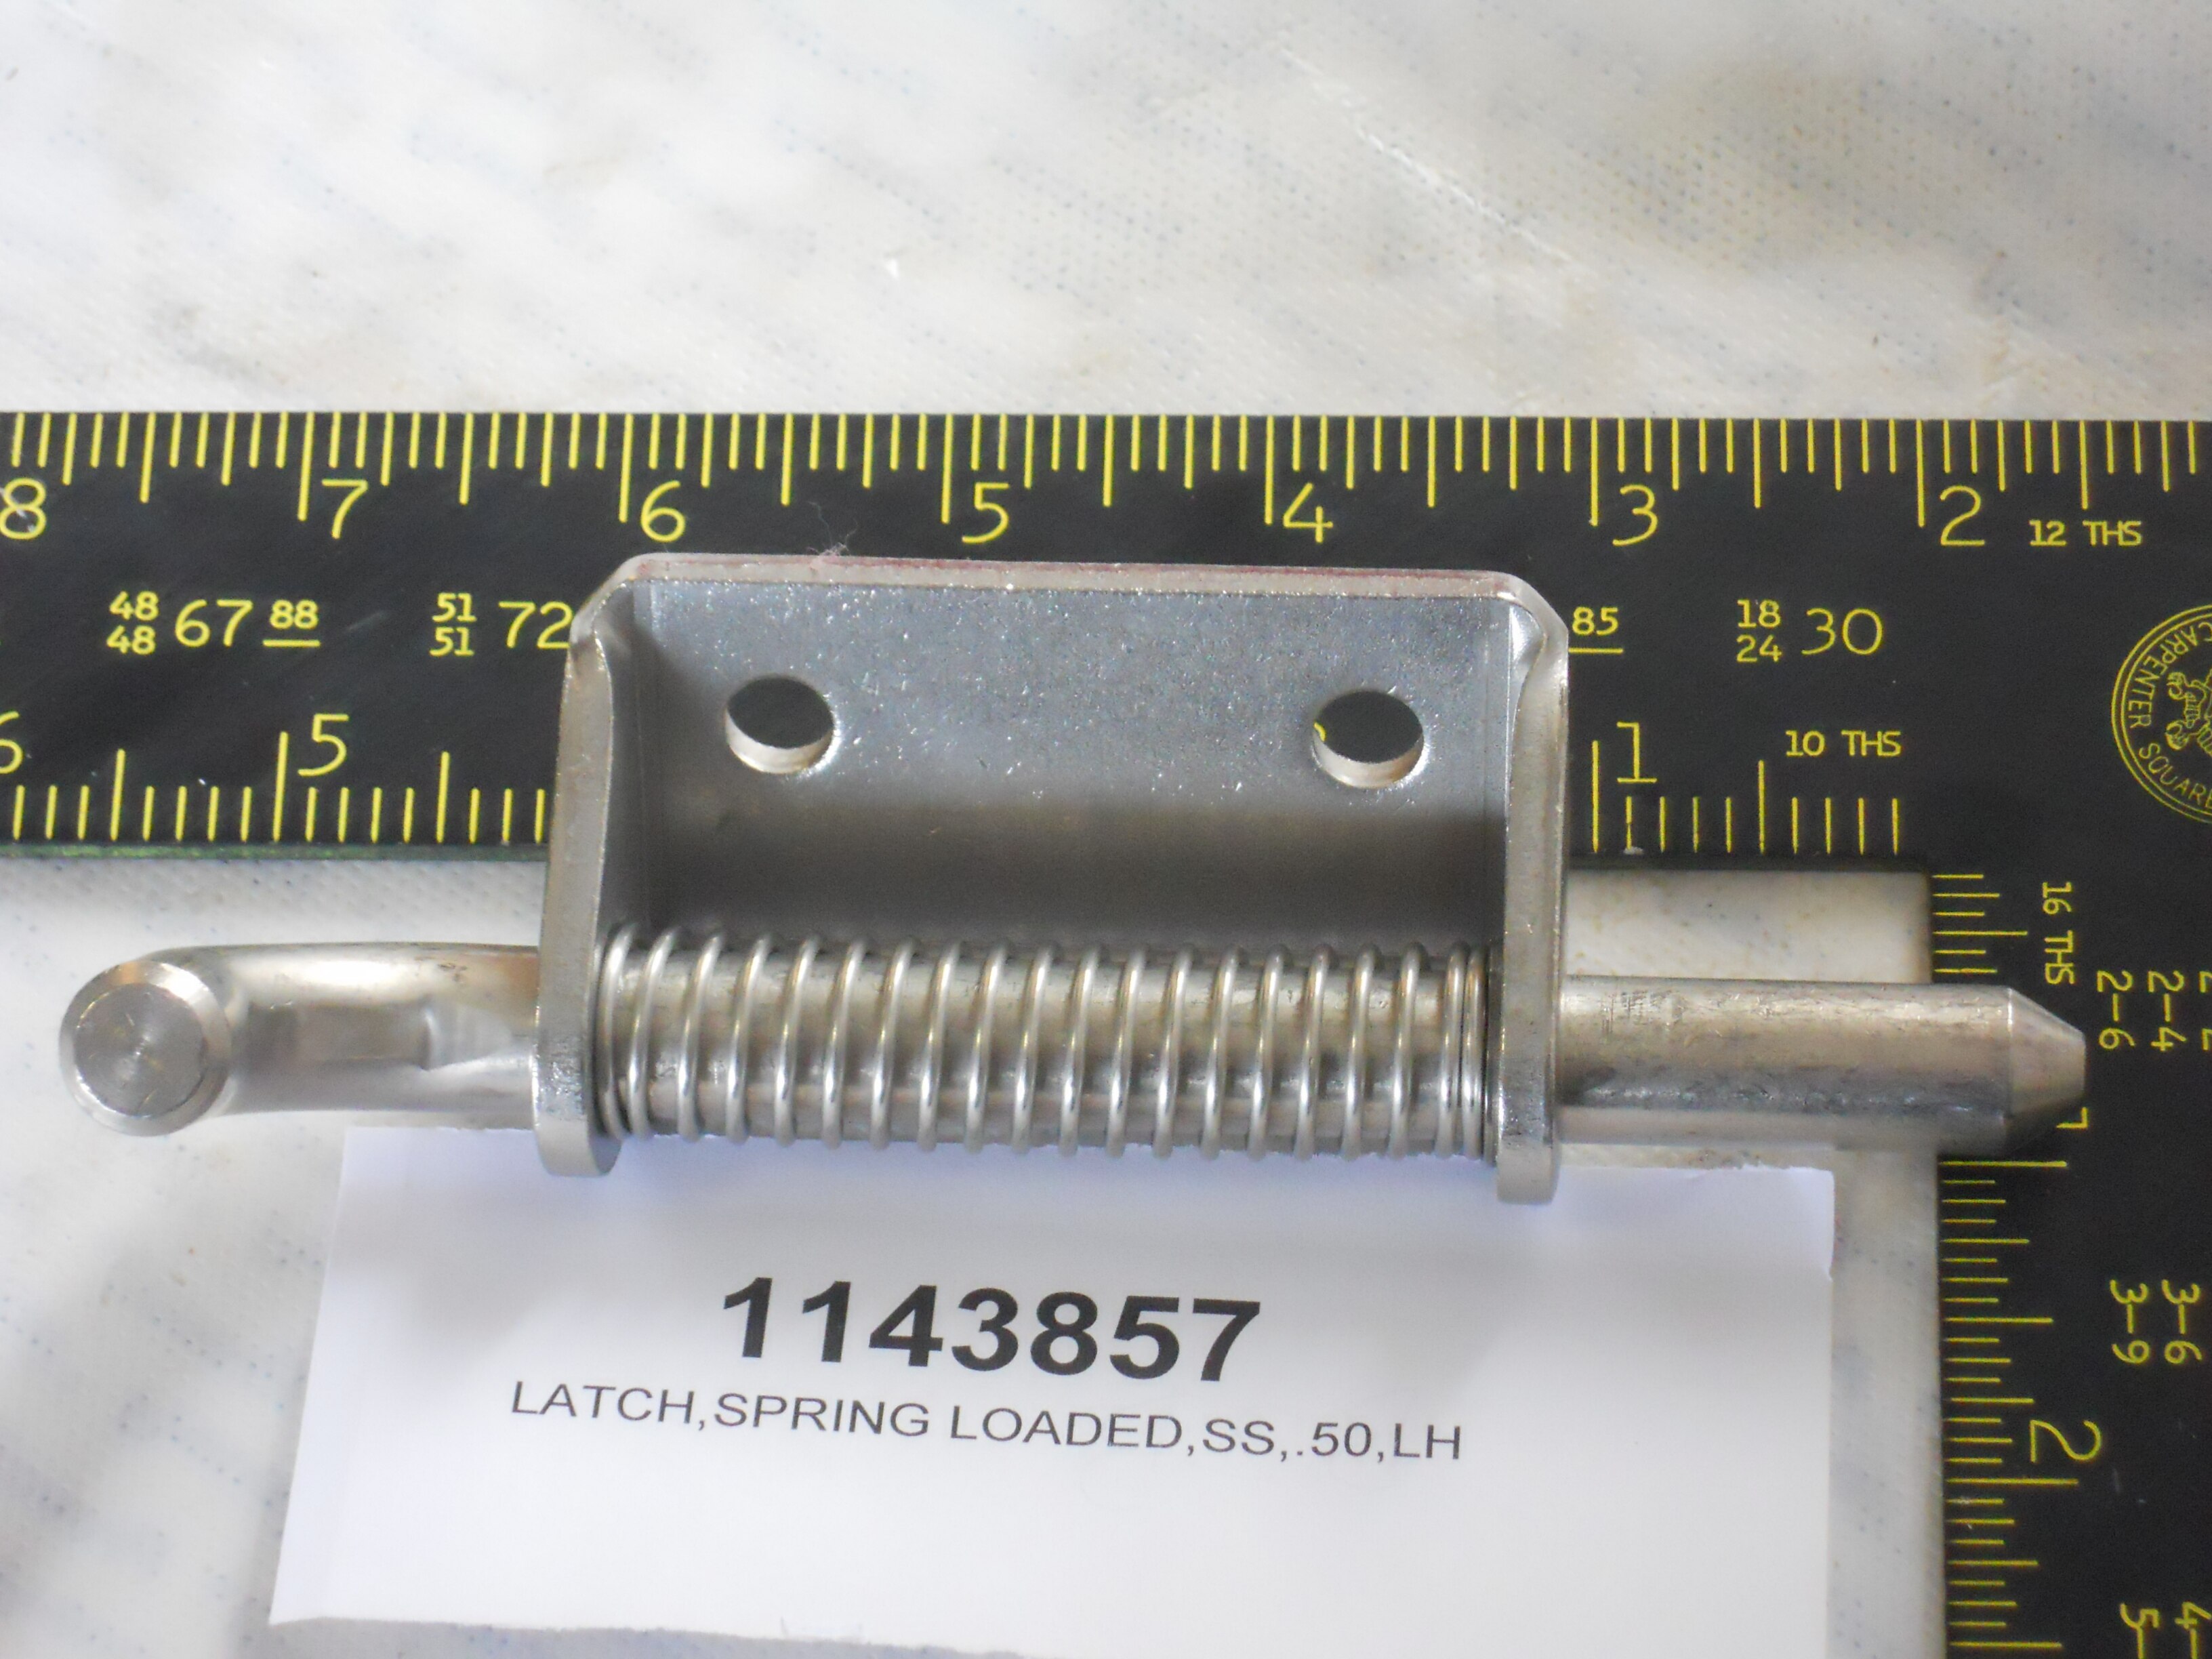 LATCH,SPRING LOADED,SS,.50,LH